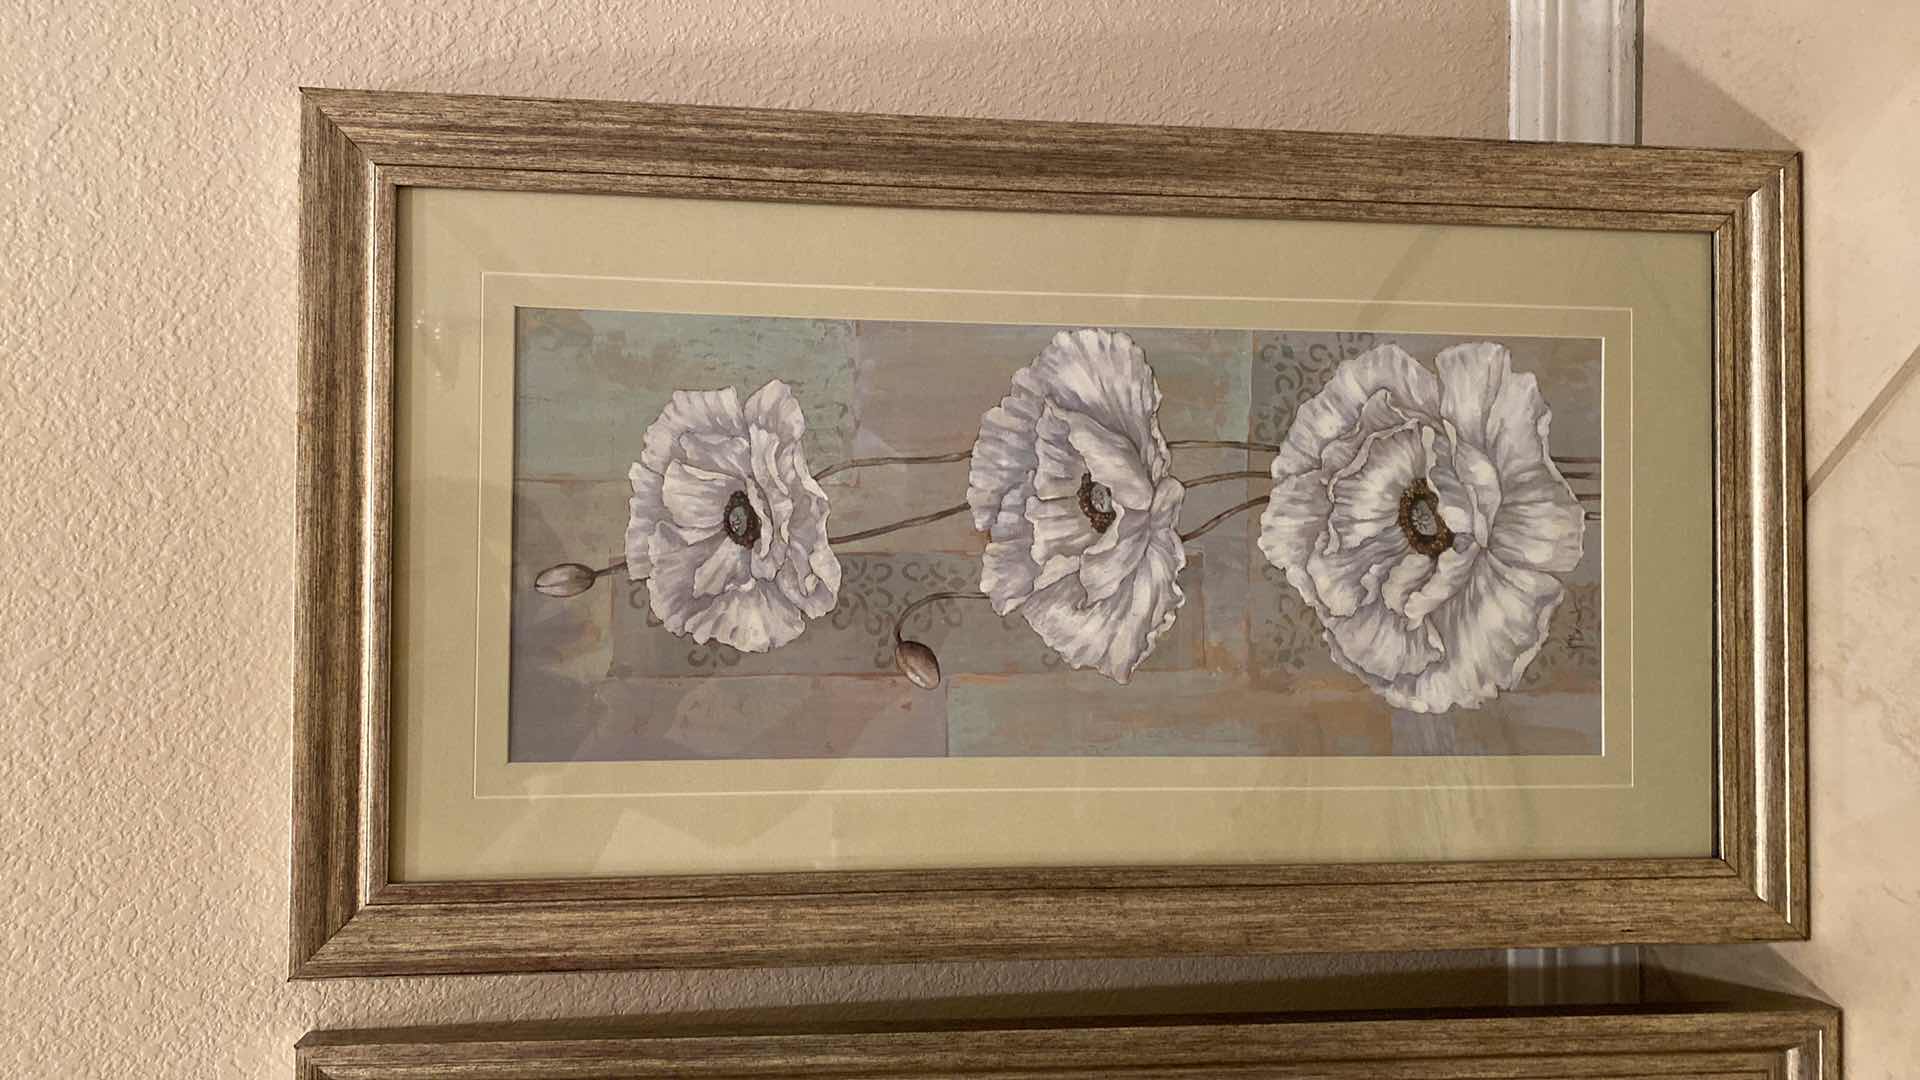 Photo 3 of PAIR OF FRAMED FLORAL ARTWORKS 14 1/2“ x 26 1/2“ AND FABRIC WALL DECOR